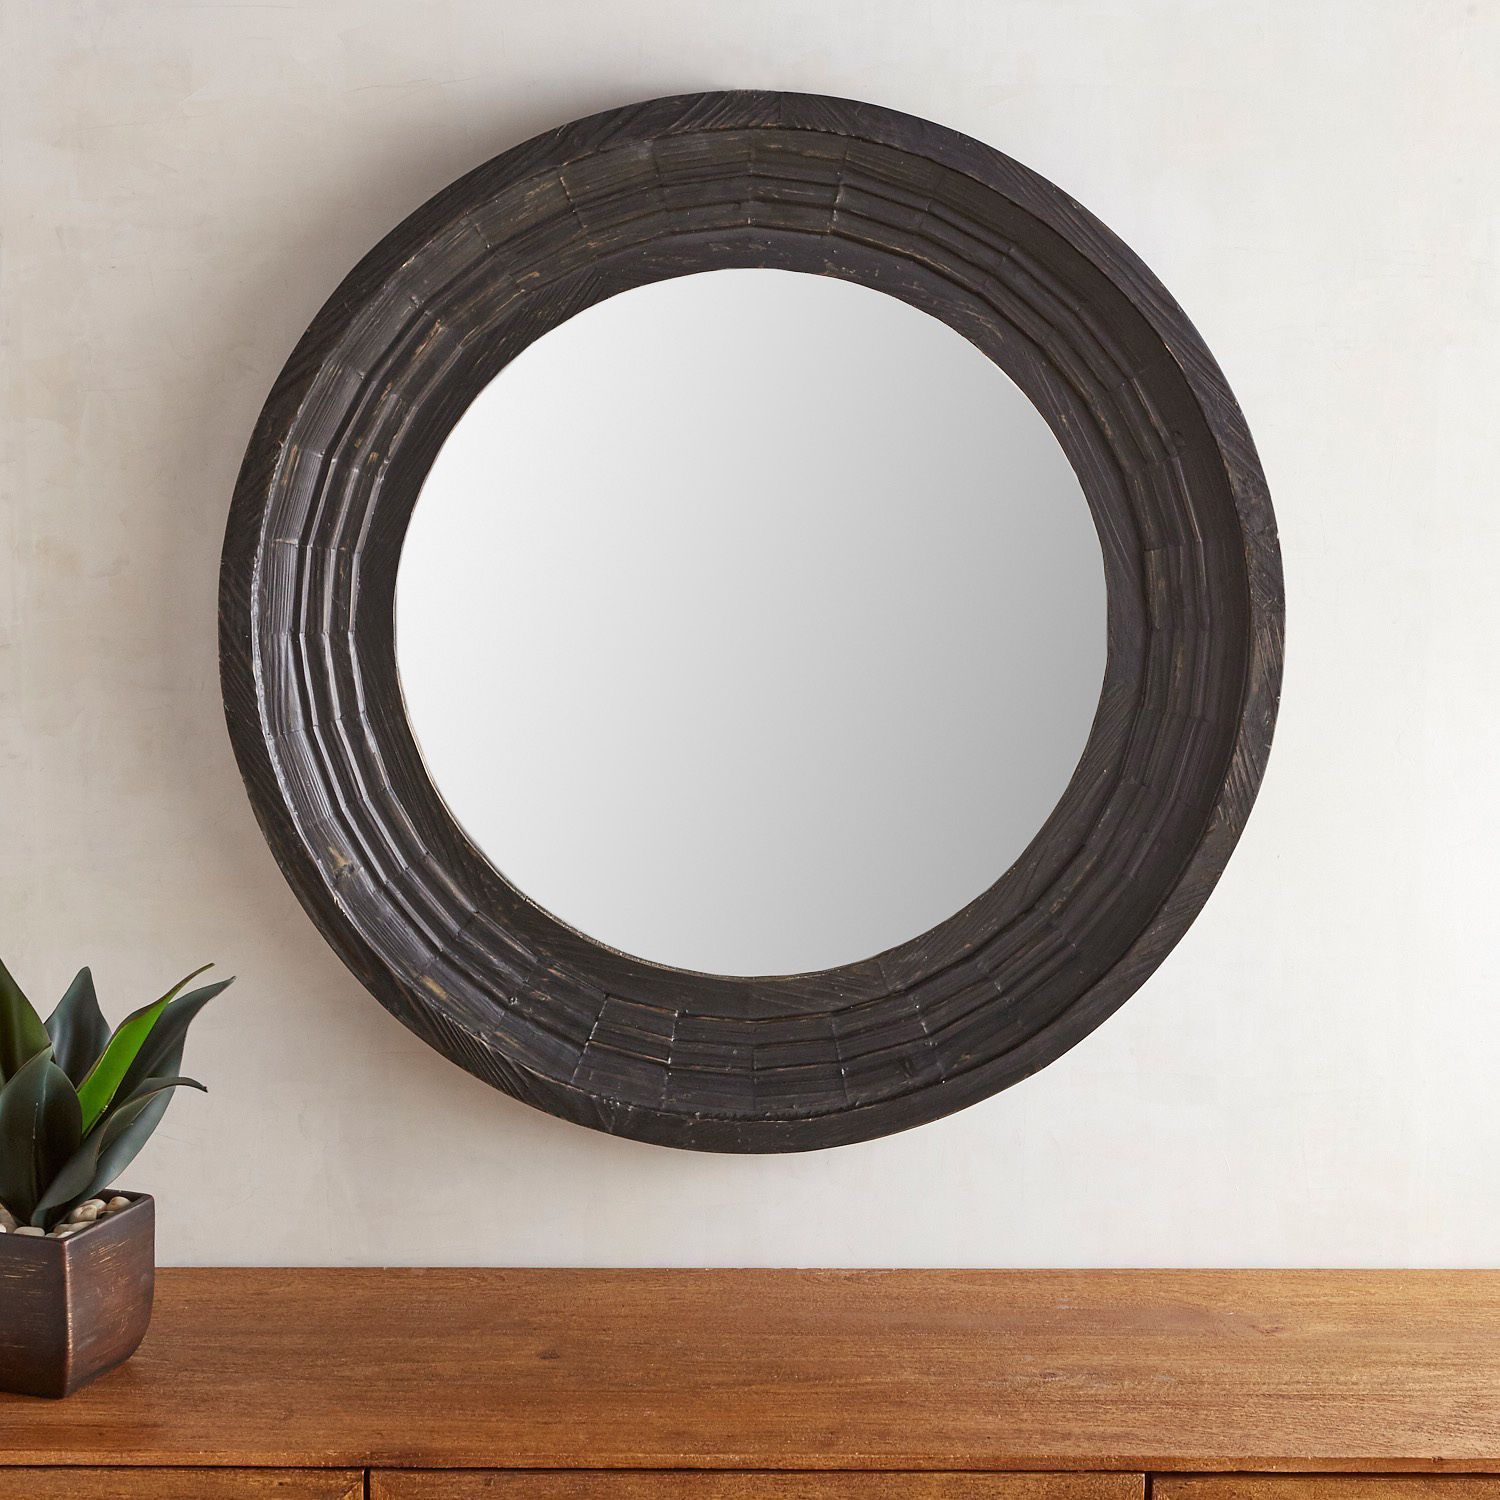 Bailey Farmhouse Black Round Mirror | Pier 1 Imports | Black Round Intended For Black Openwork Round Metal Wall Mirrors (View 7 of 15)